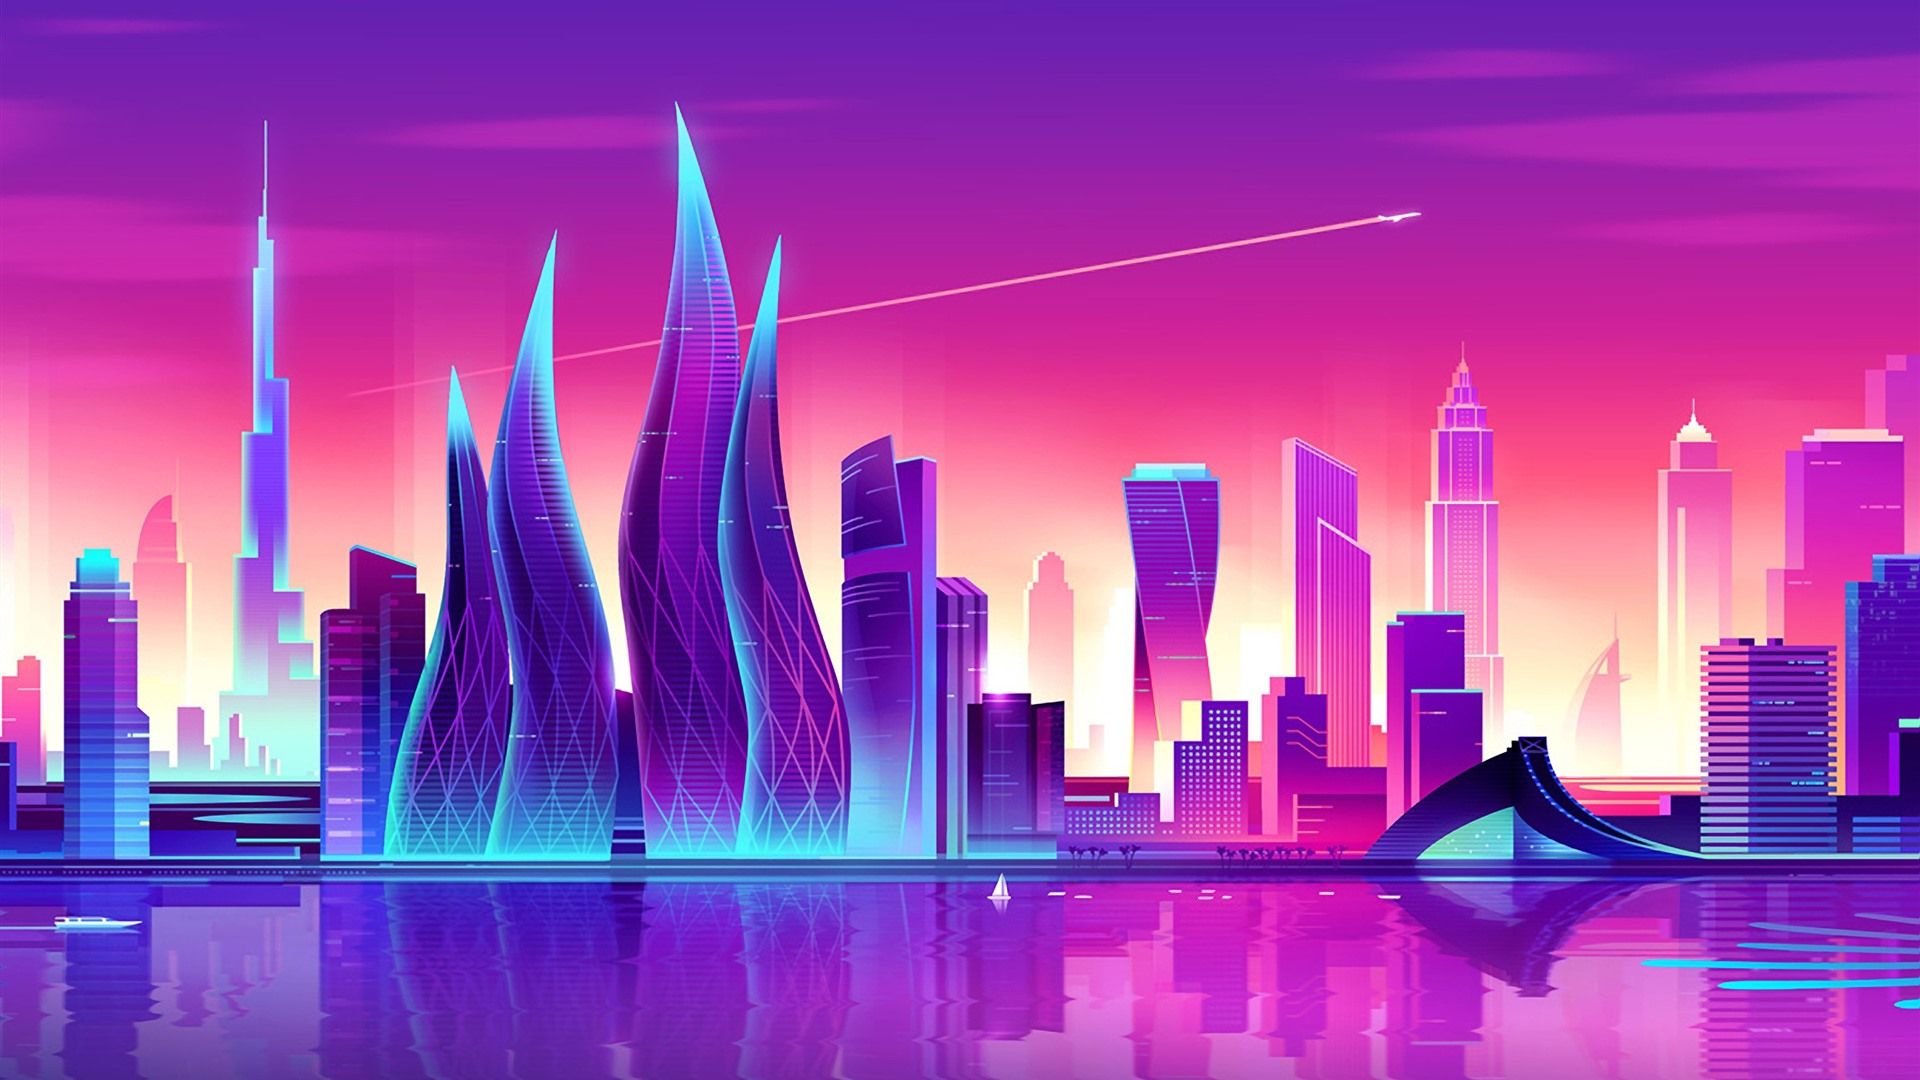 Art Vector Picture, City, Purple Style, Skyscrapers, Dubai 828x1792 IPhone 11 XR Wallpaper, Background, Picture, Image